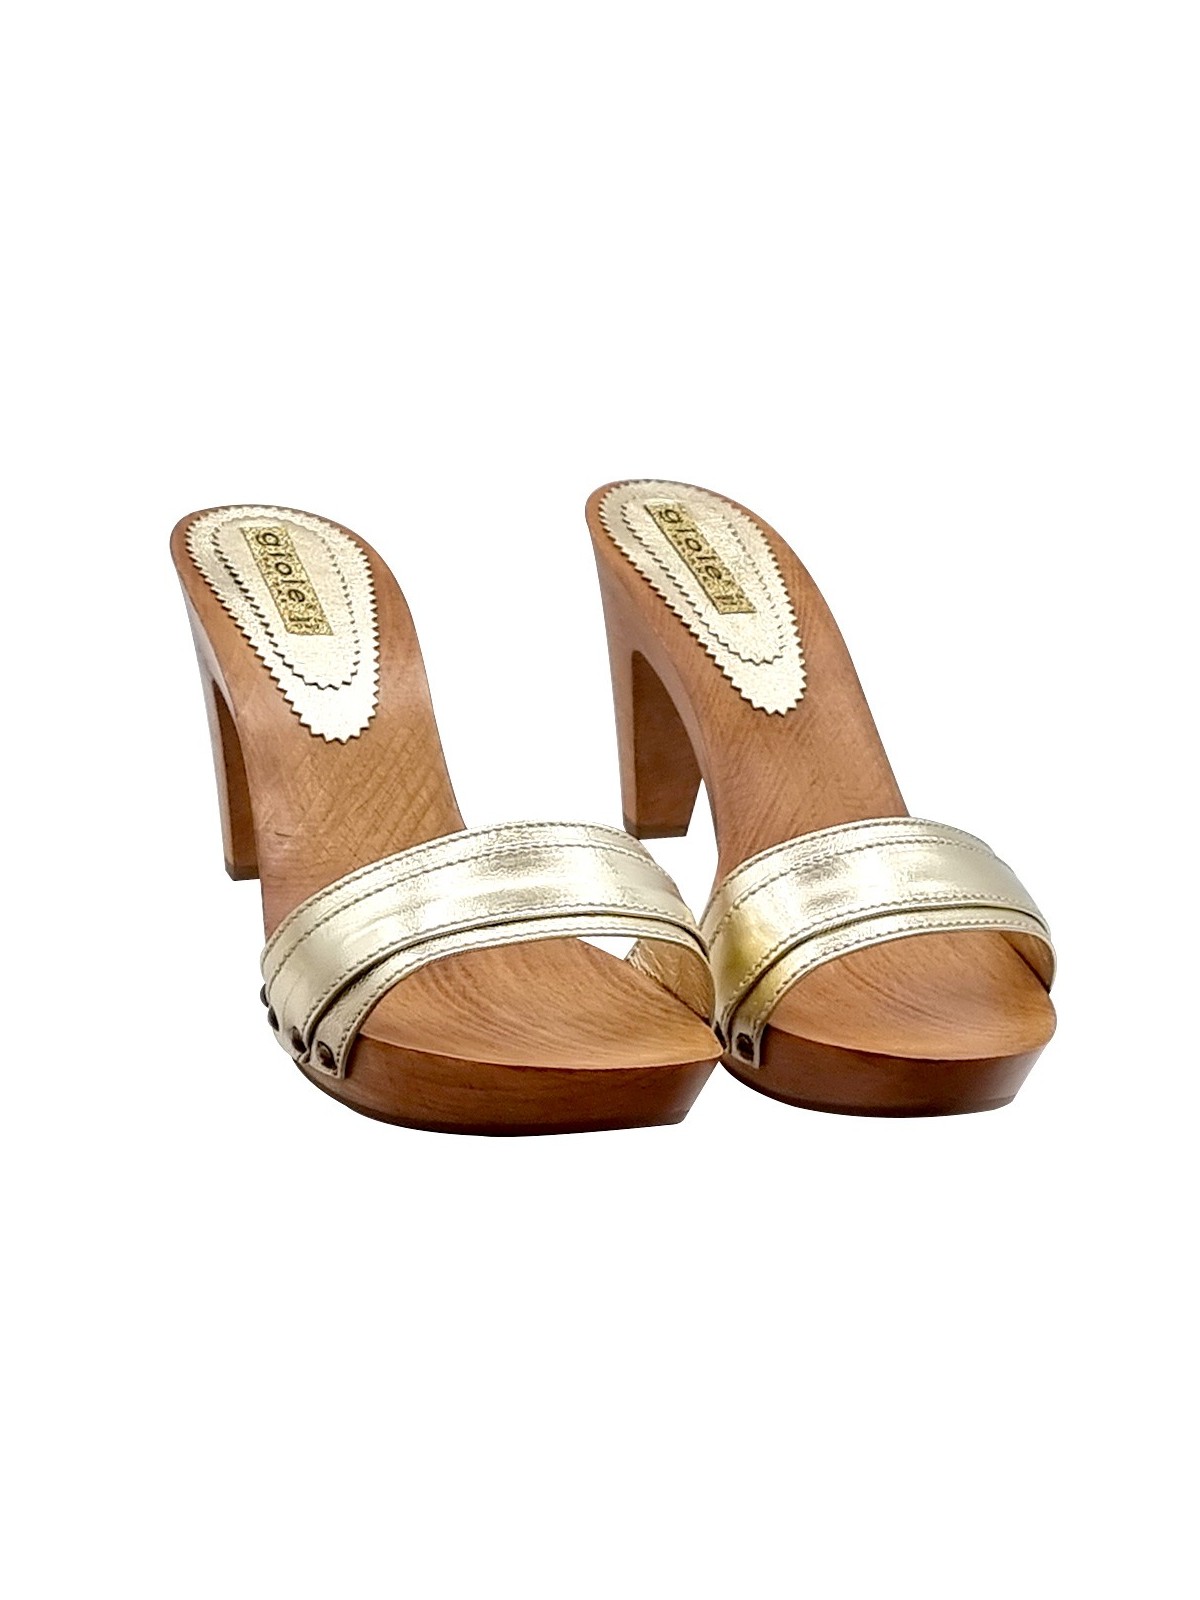 CLOGS WITH GOLD LEATHER BAND AND 9.5 HEEL